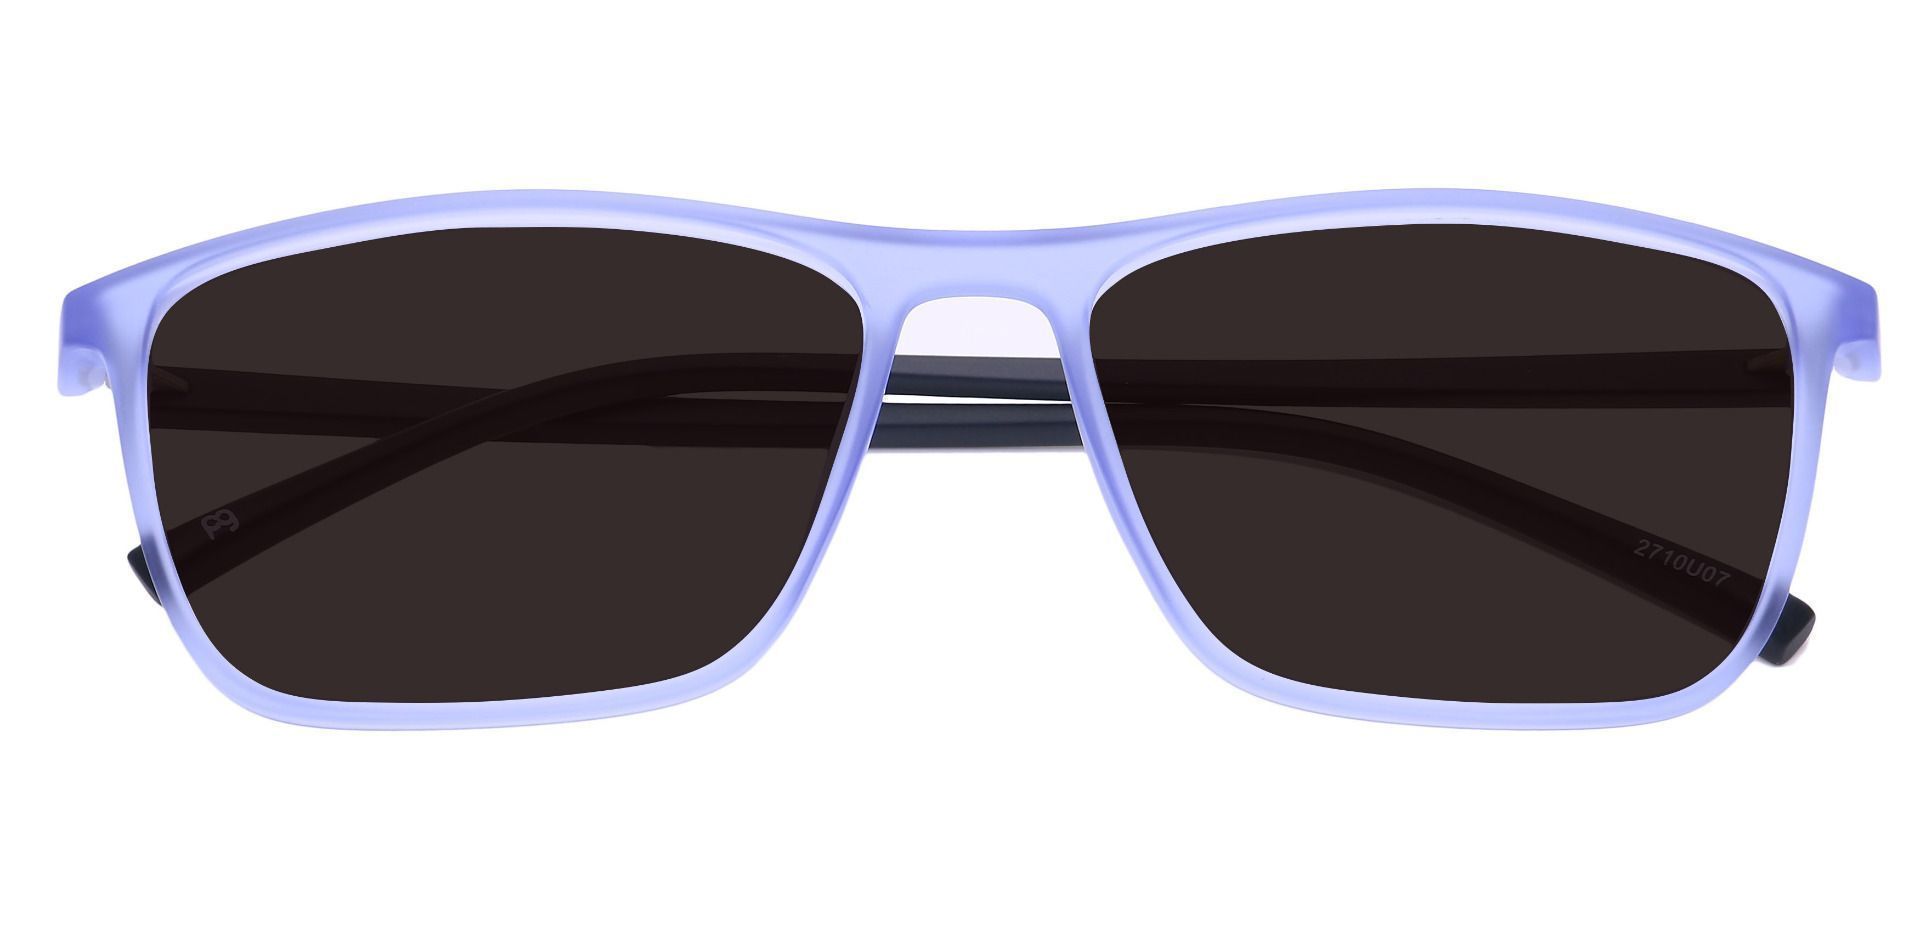 Candid Rectangle Lined Bifocal Sunglasses - Blue Frame With Gray Lenses